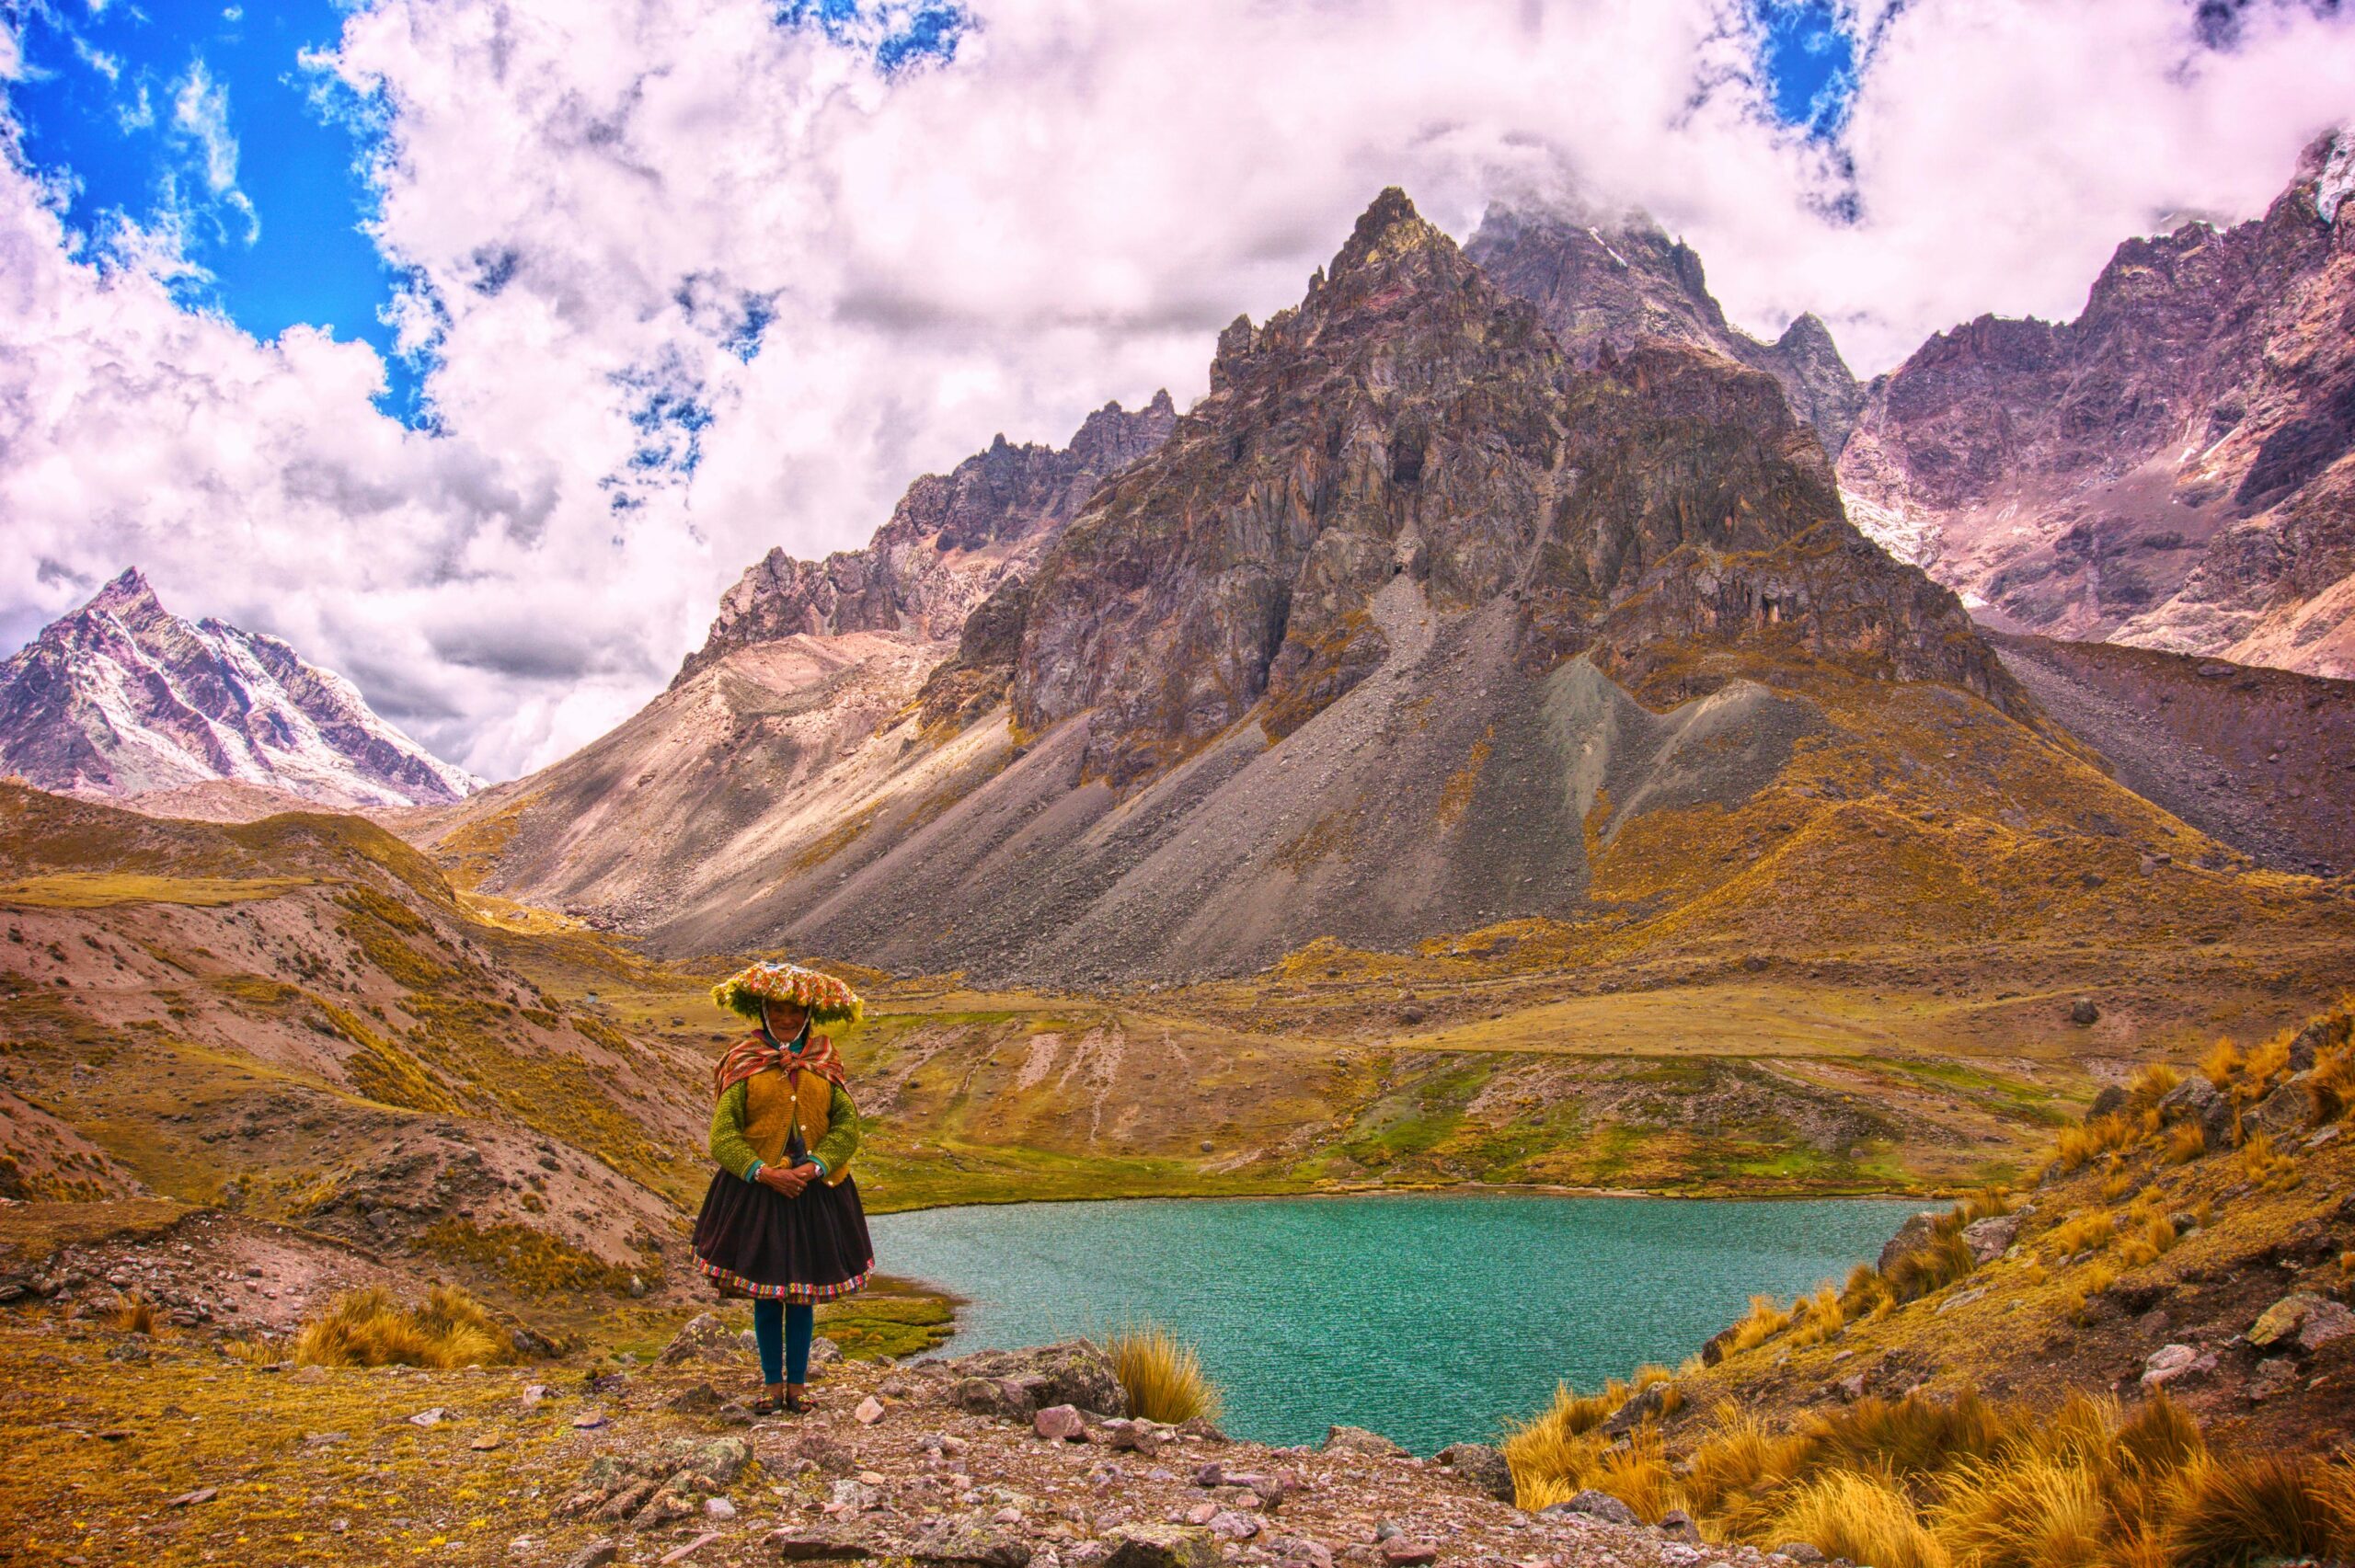 Photo by Yohuan Cuadros: https://www.pexels.com/photo/woman-in-traditional-folk-costume-at-the-lake-at-the-foot-of-nevado-auzangate-in-the-peruvian-andes-19211101/